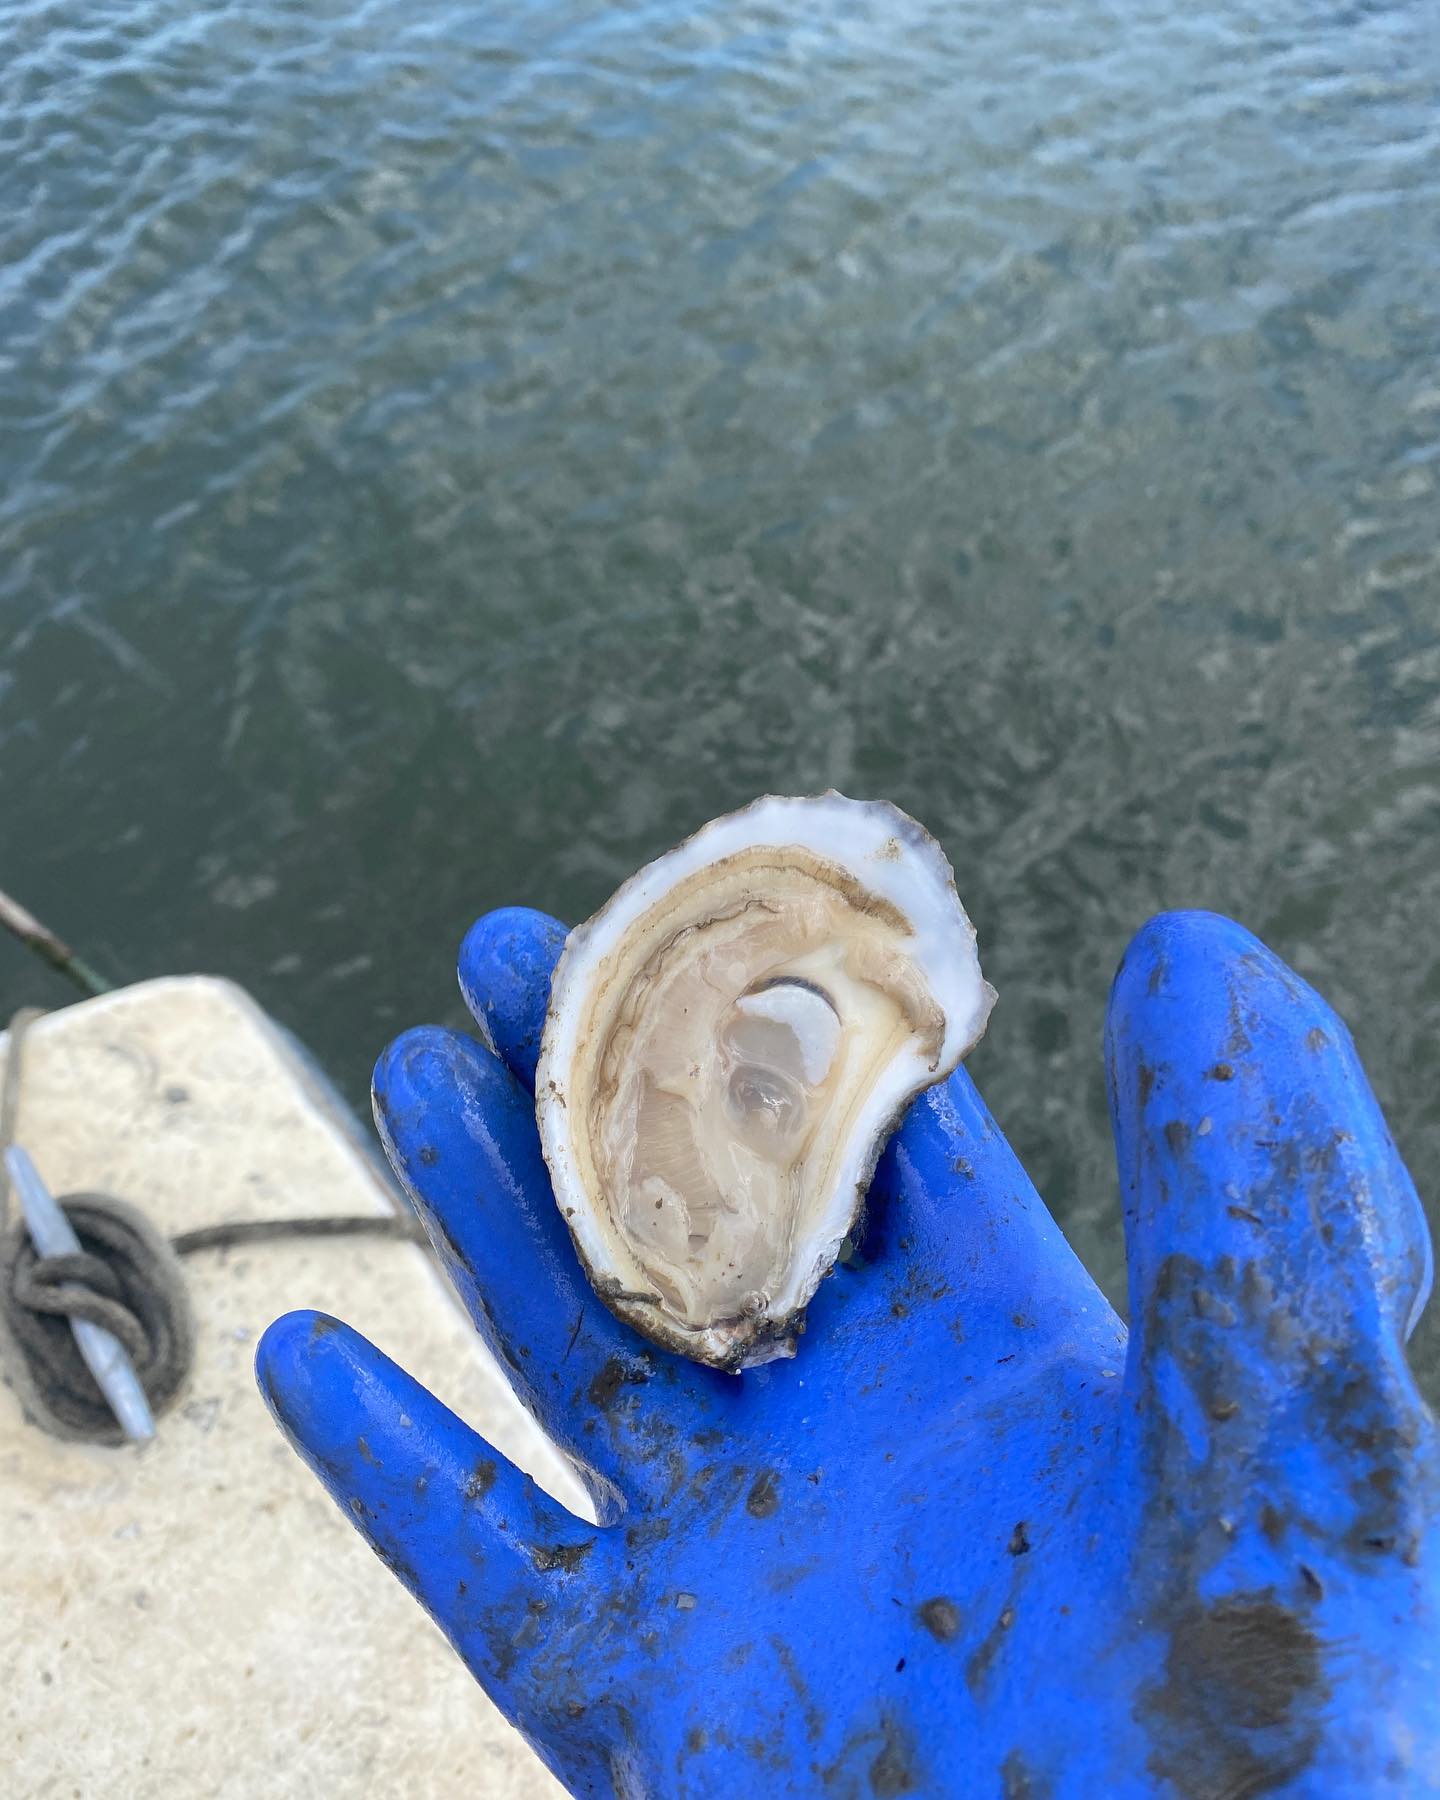 A blue-gloved hand holds an oyster that has been opened and is in the half shell